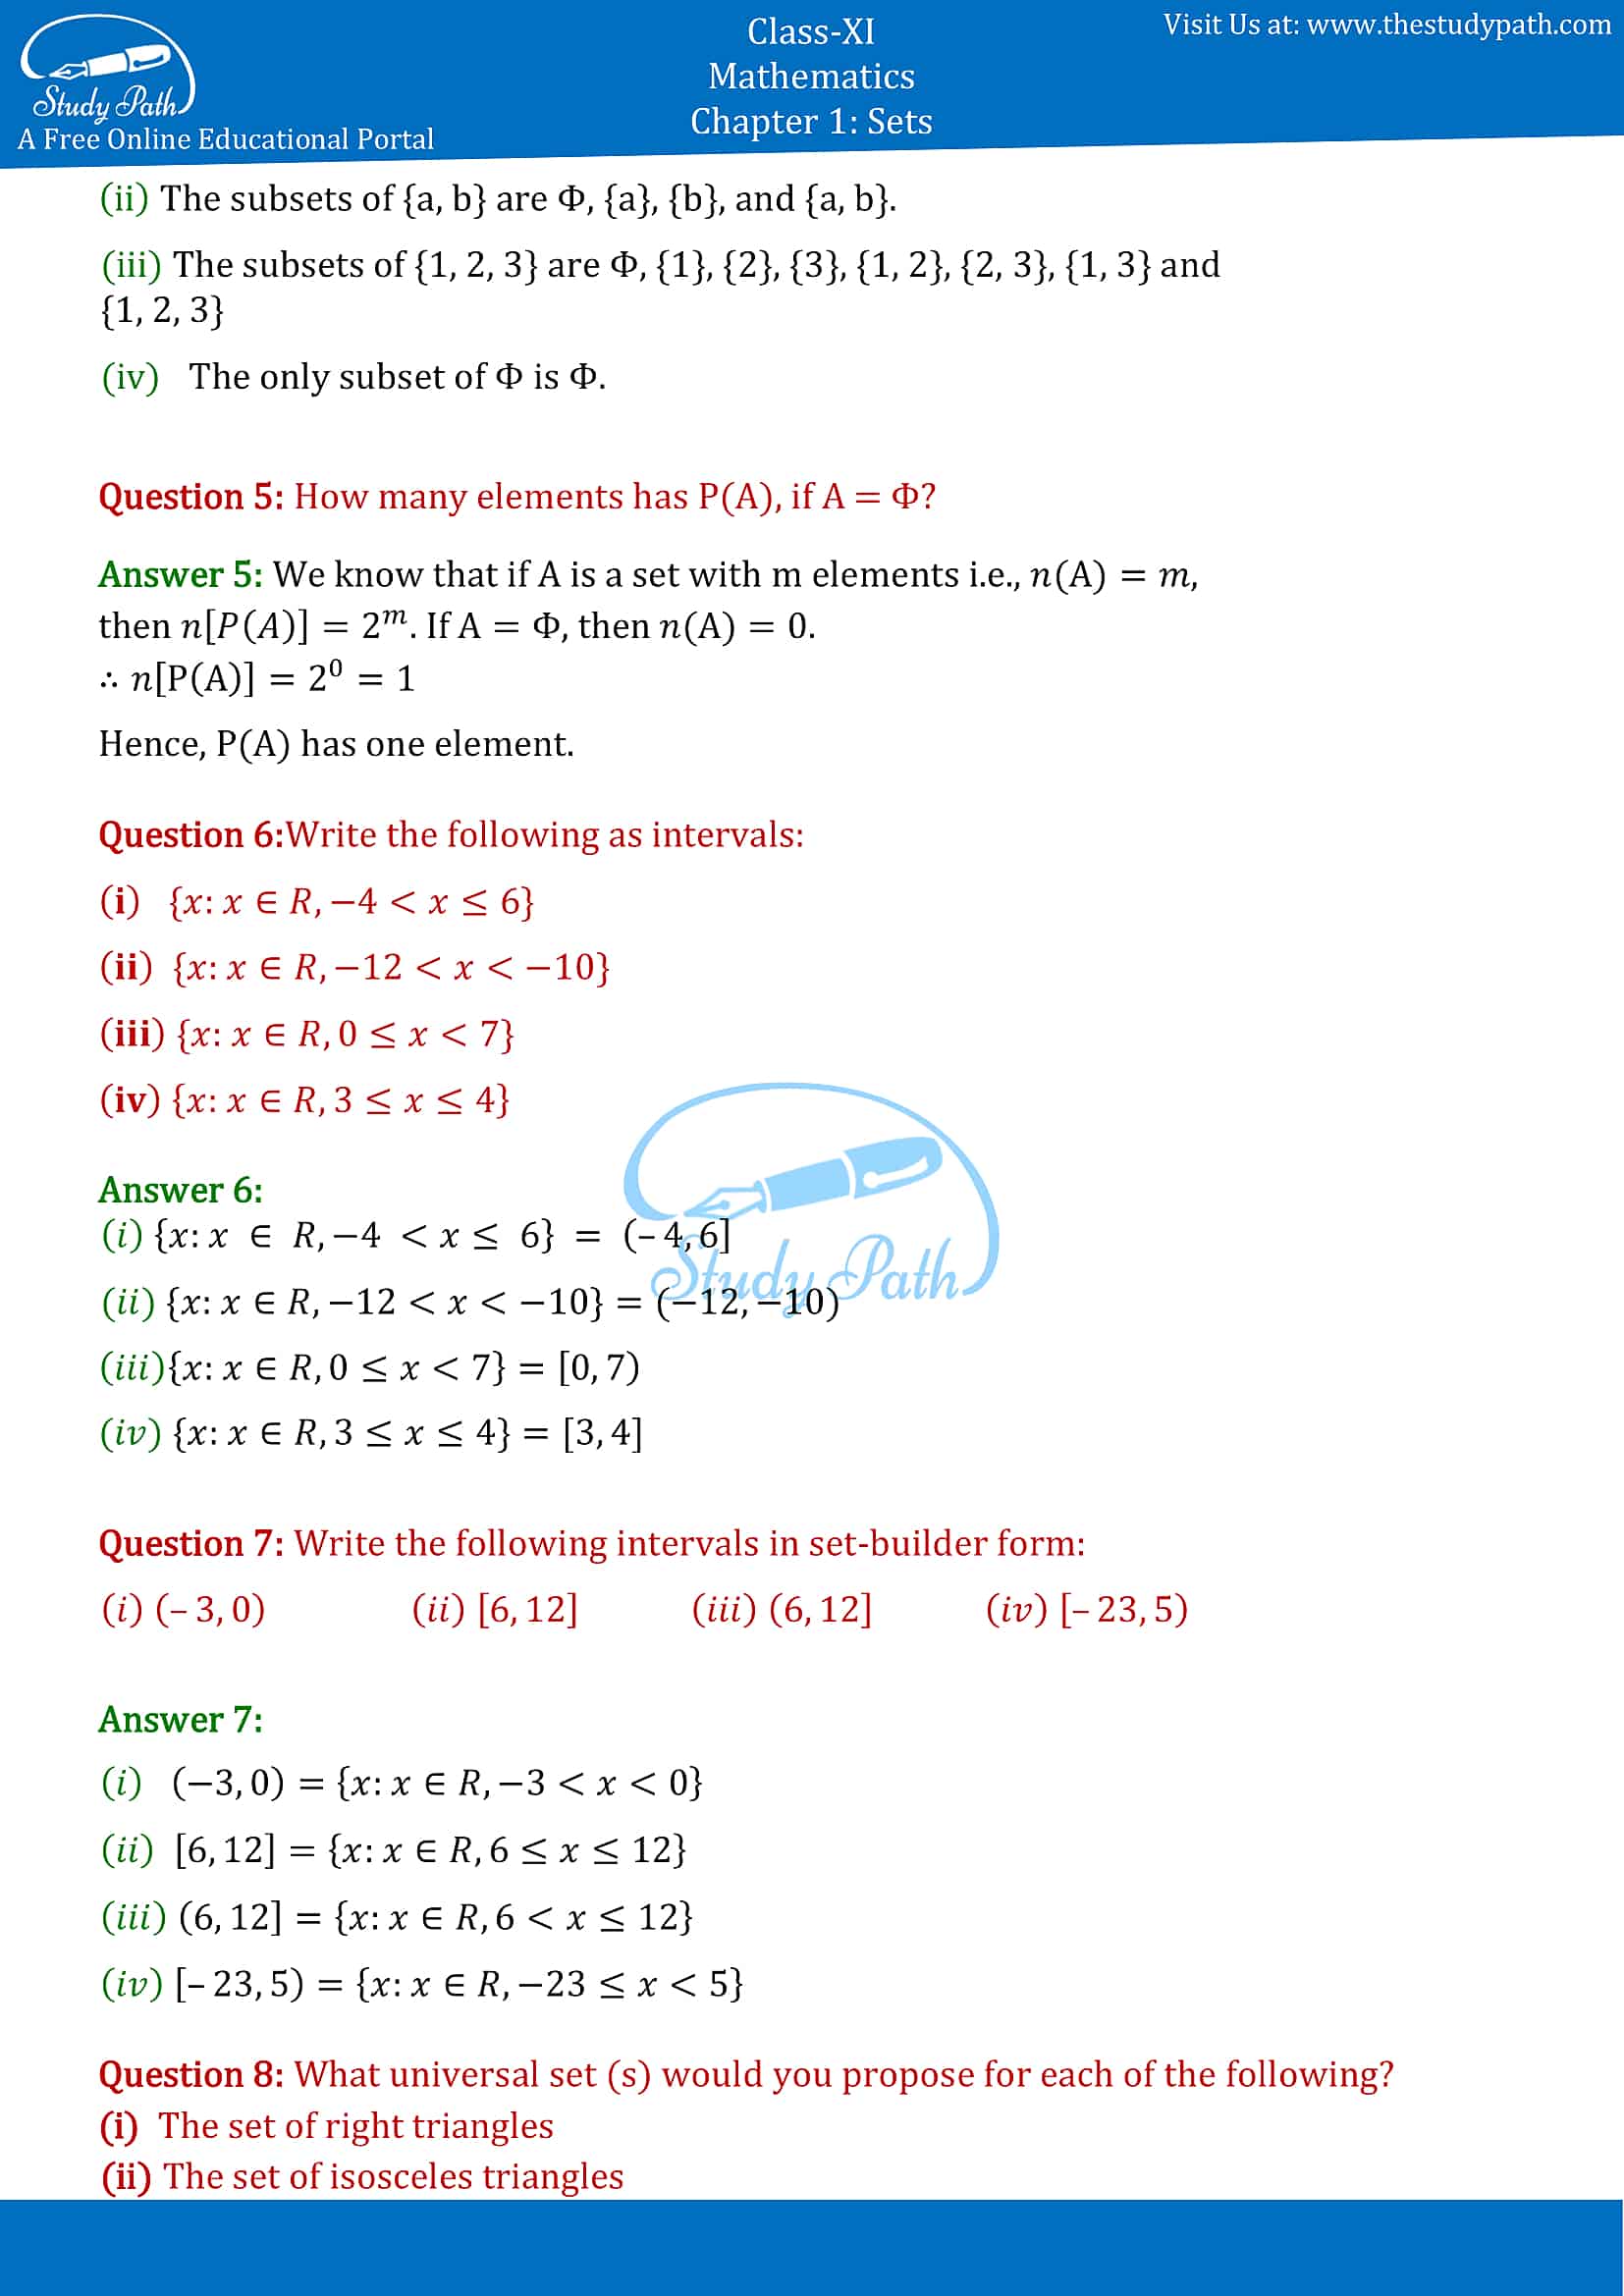 NCERT Solutions for Class 11 Maths chapter 1 sets Exercise 1.3